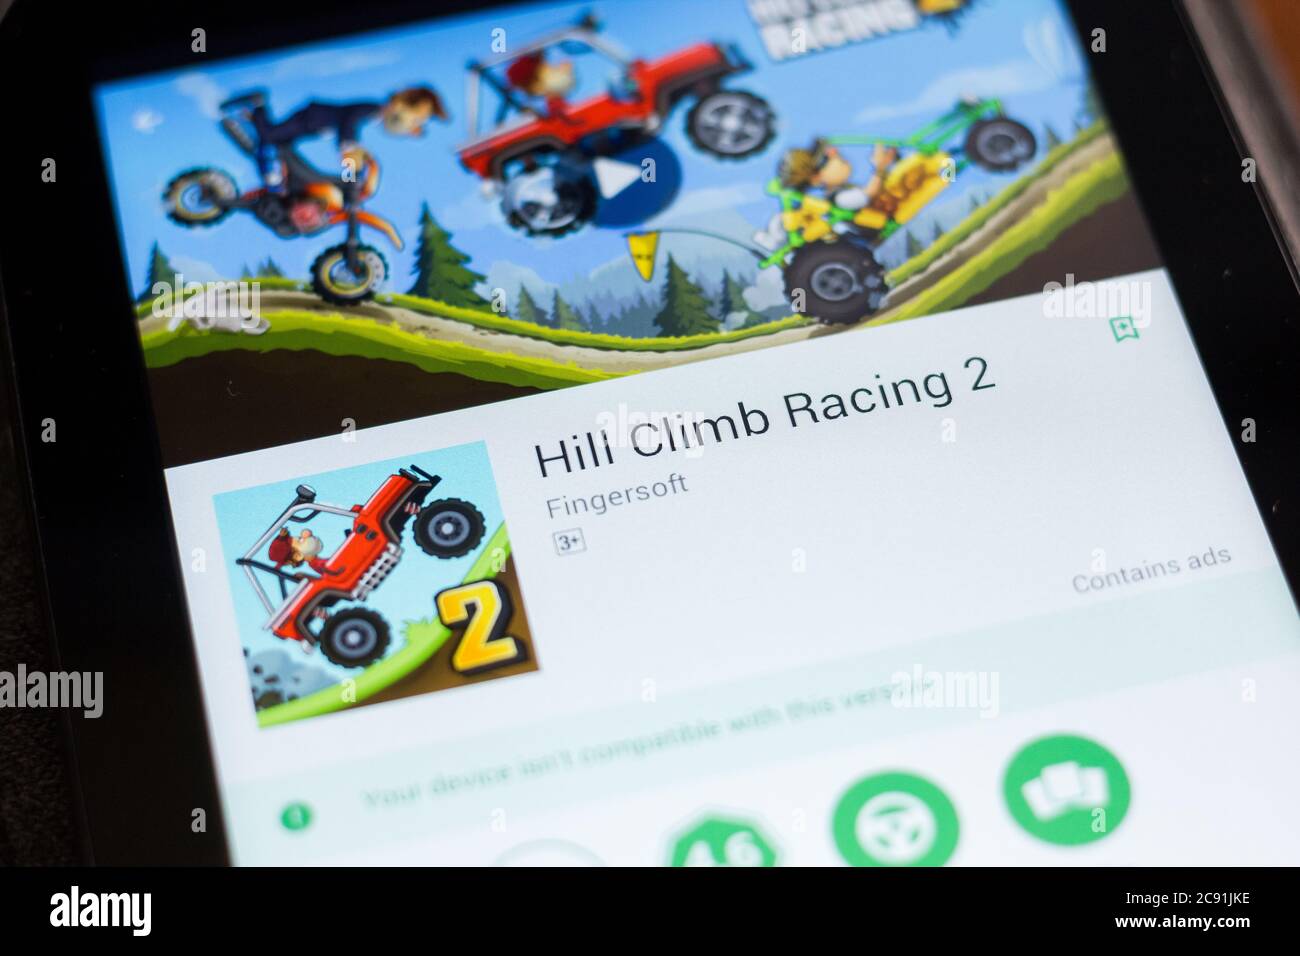 London, United Kingdom - October 26, 2018: Close-up shot of the Hill Climb  Racing 2 application icon from Fingersoft on an iPhone Stock Photo - Alamy